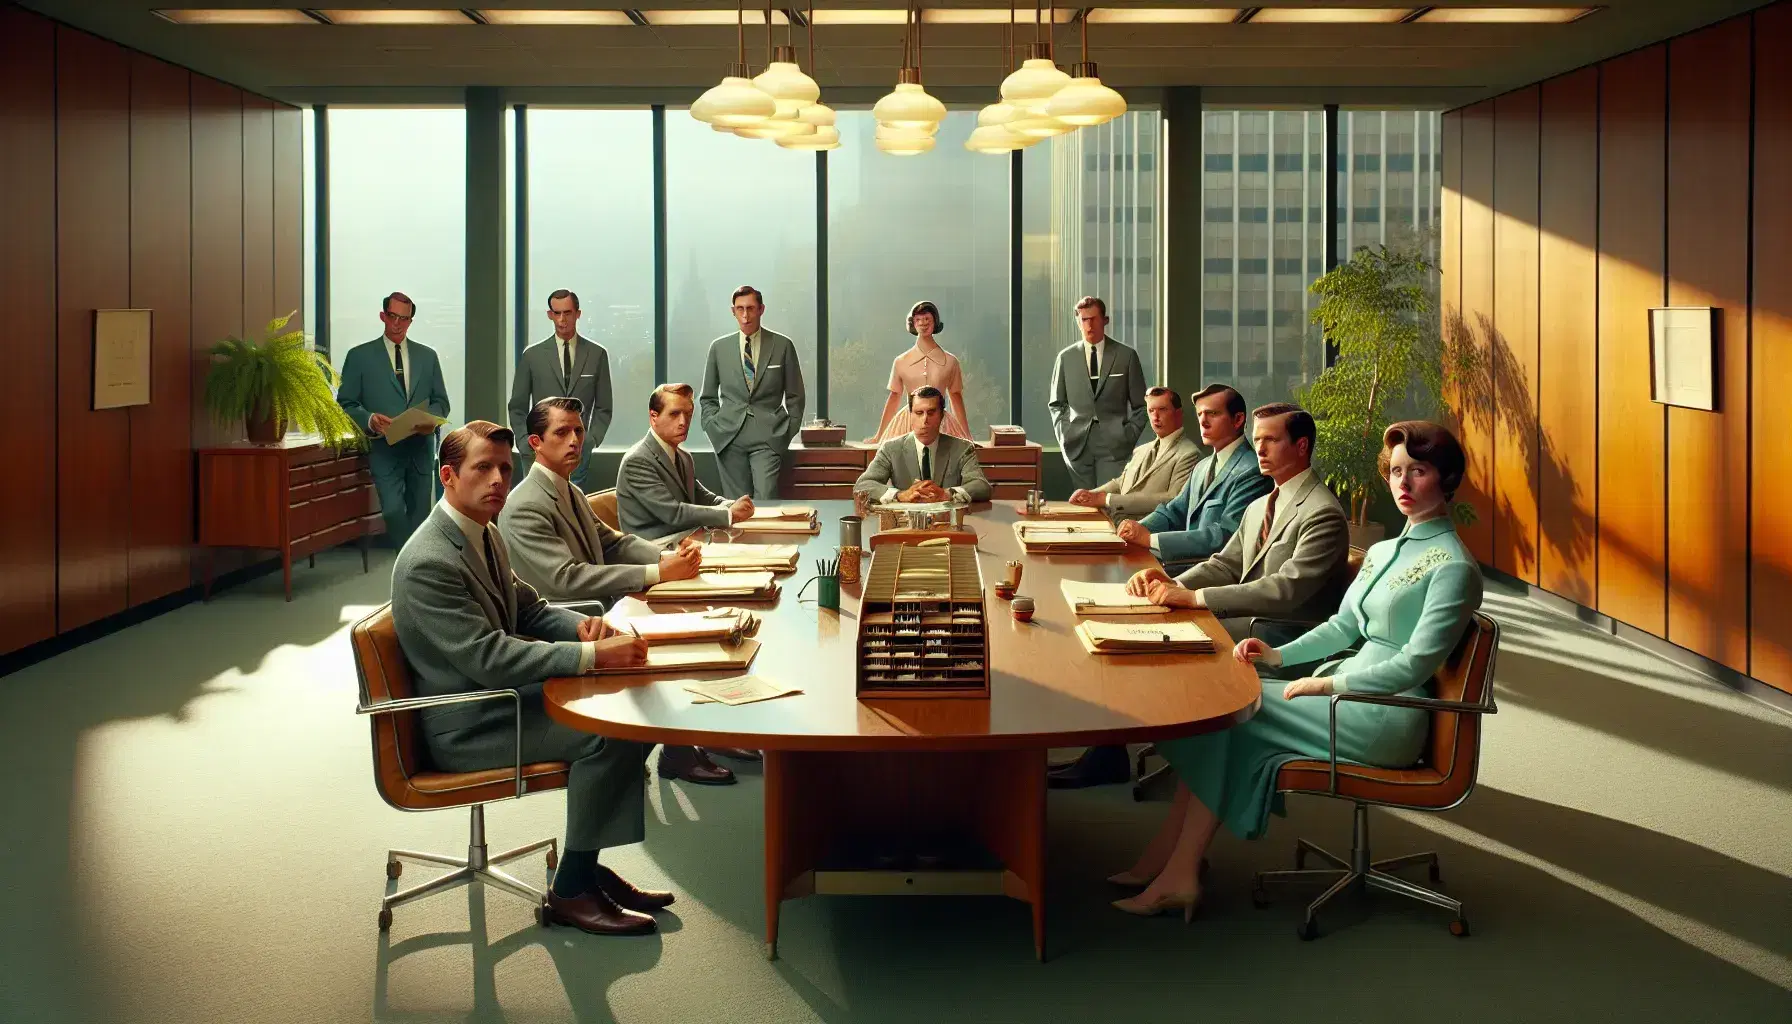 Mid-century modern office with men in suits seated at a wooden conference table, woman by filing cabinet, cityscape through window, and green plants.